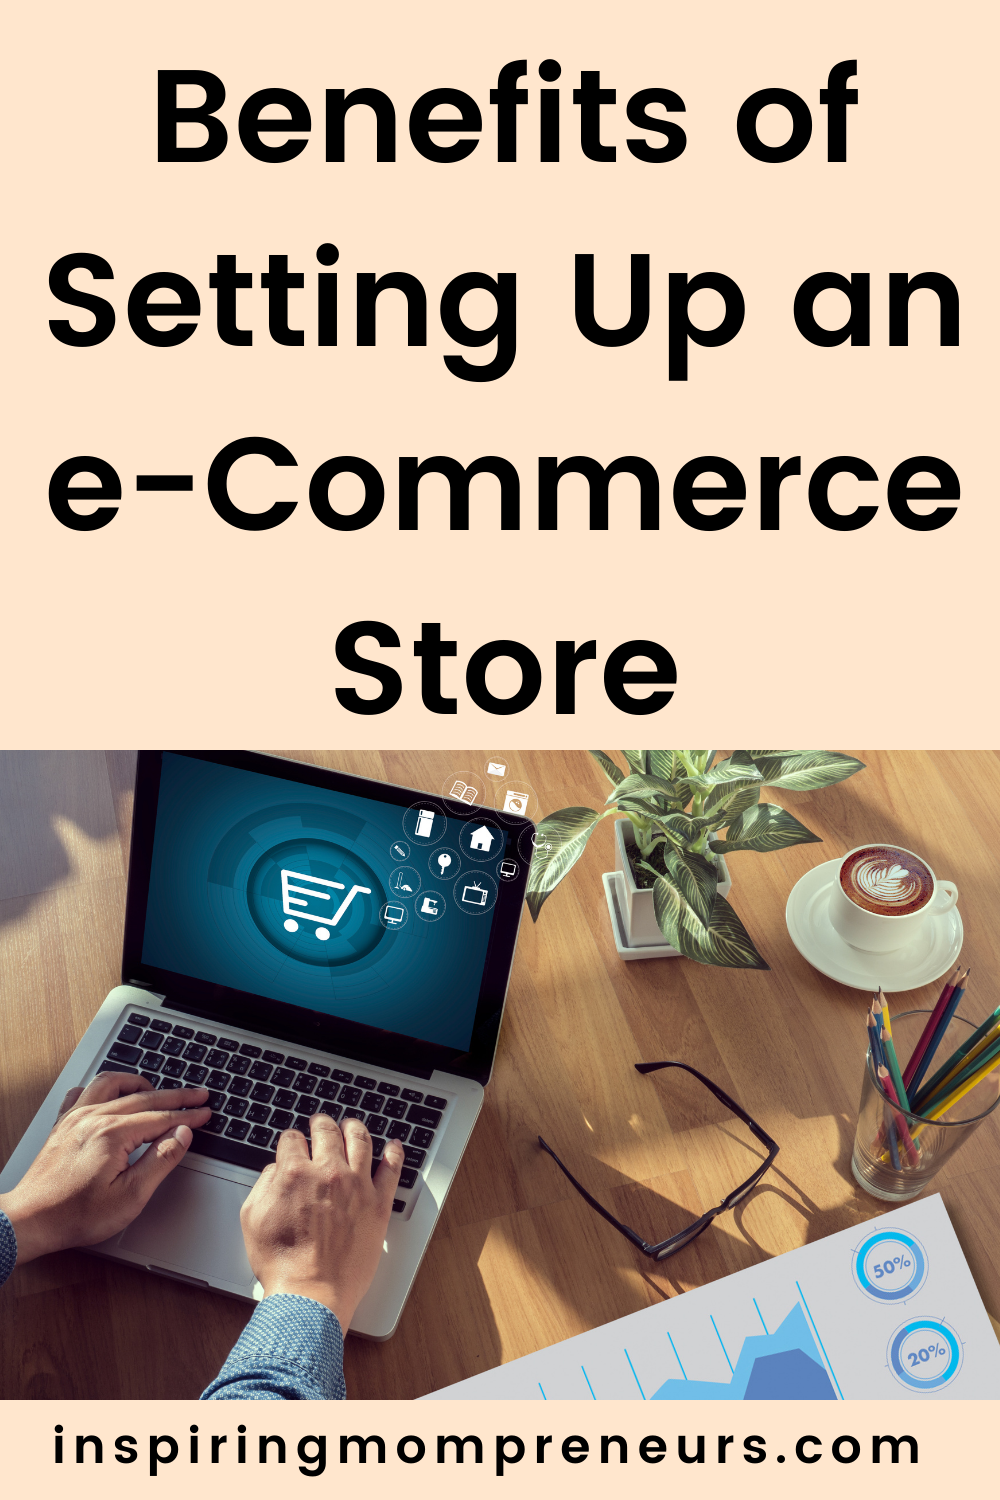 E-commerce businesses have become an increasingly popular choice for new entrepreneurs in recent years. Here are the benefits of setting up an e-Commerce store. #ecommerce #benefits #settingup #ecommercestore